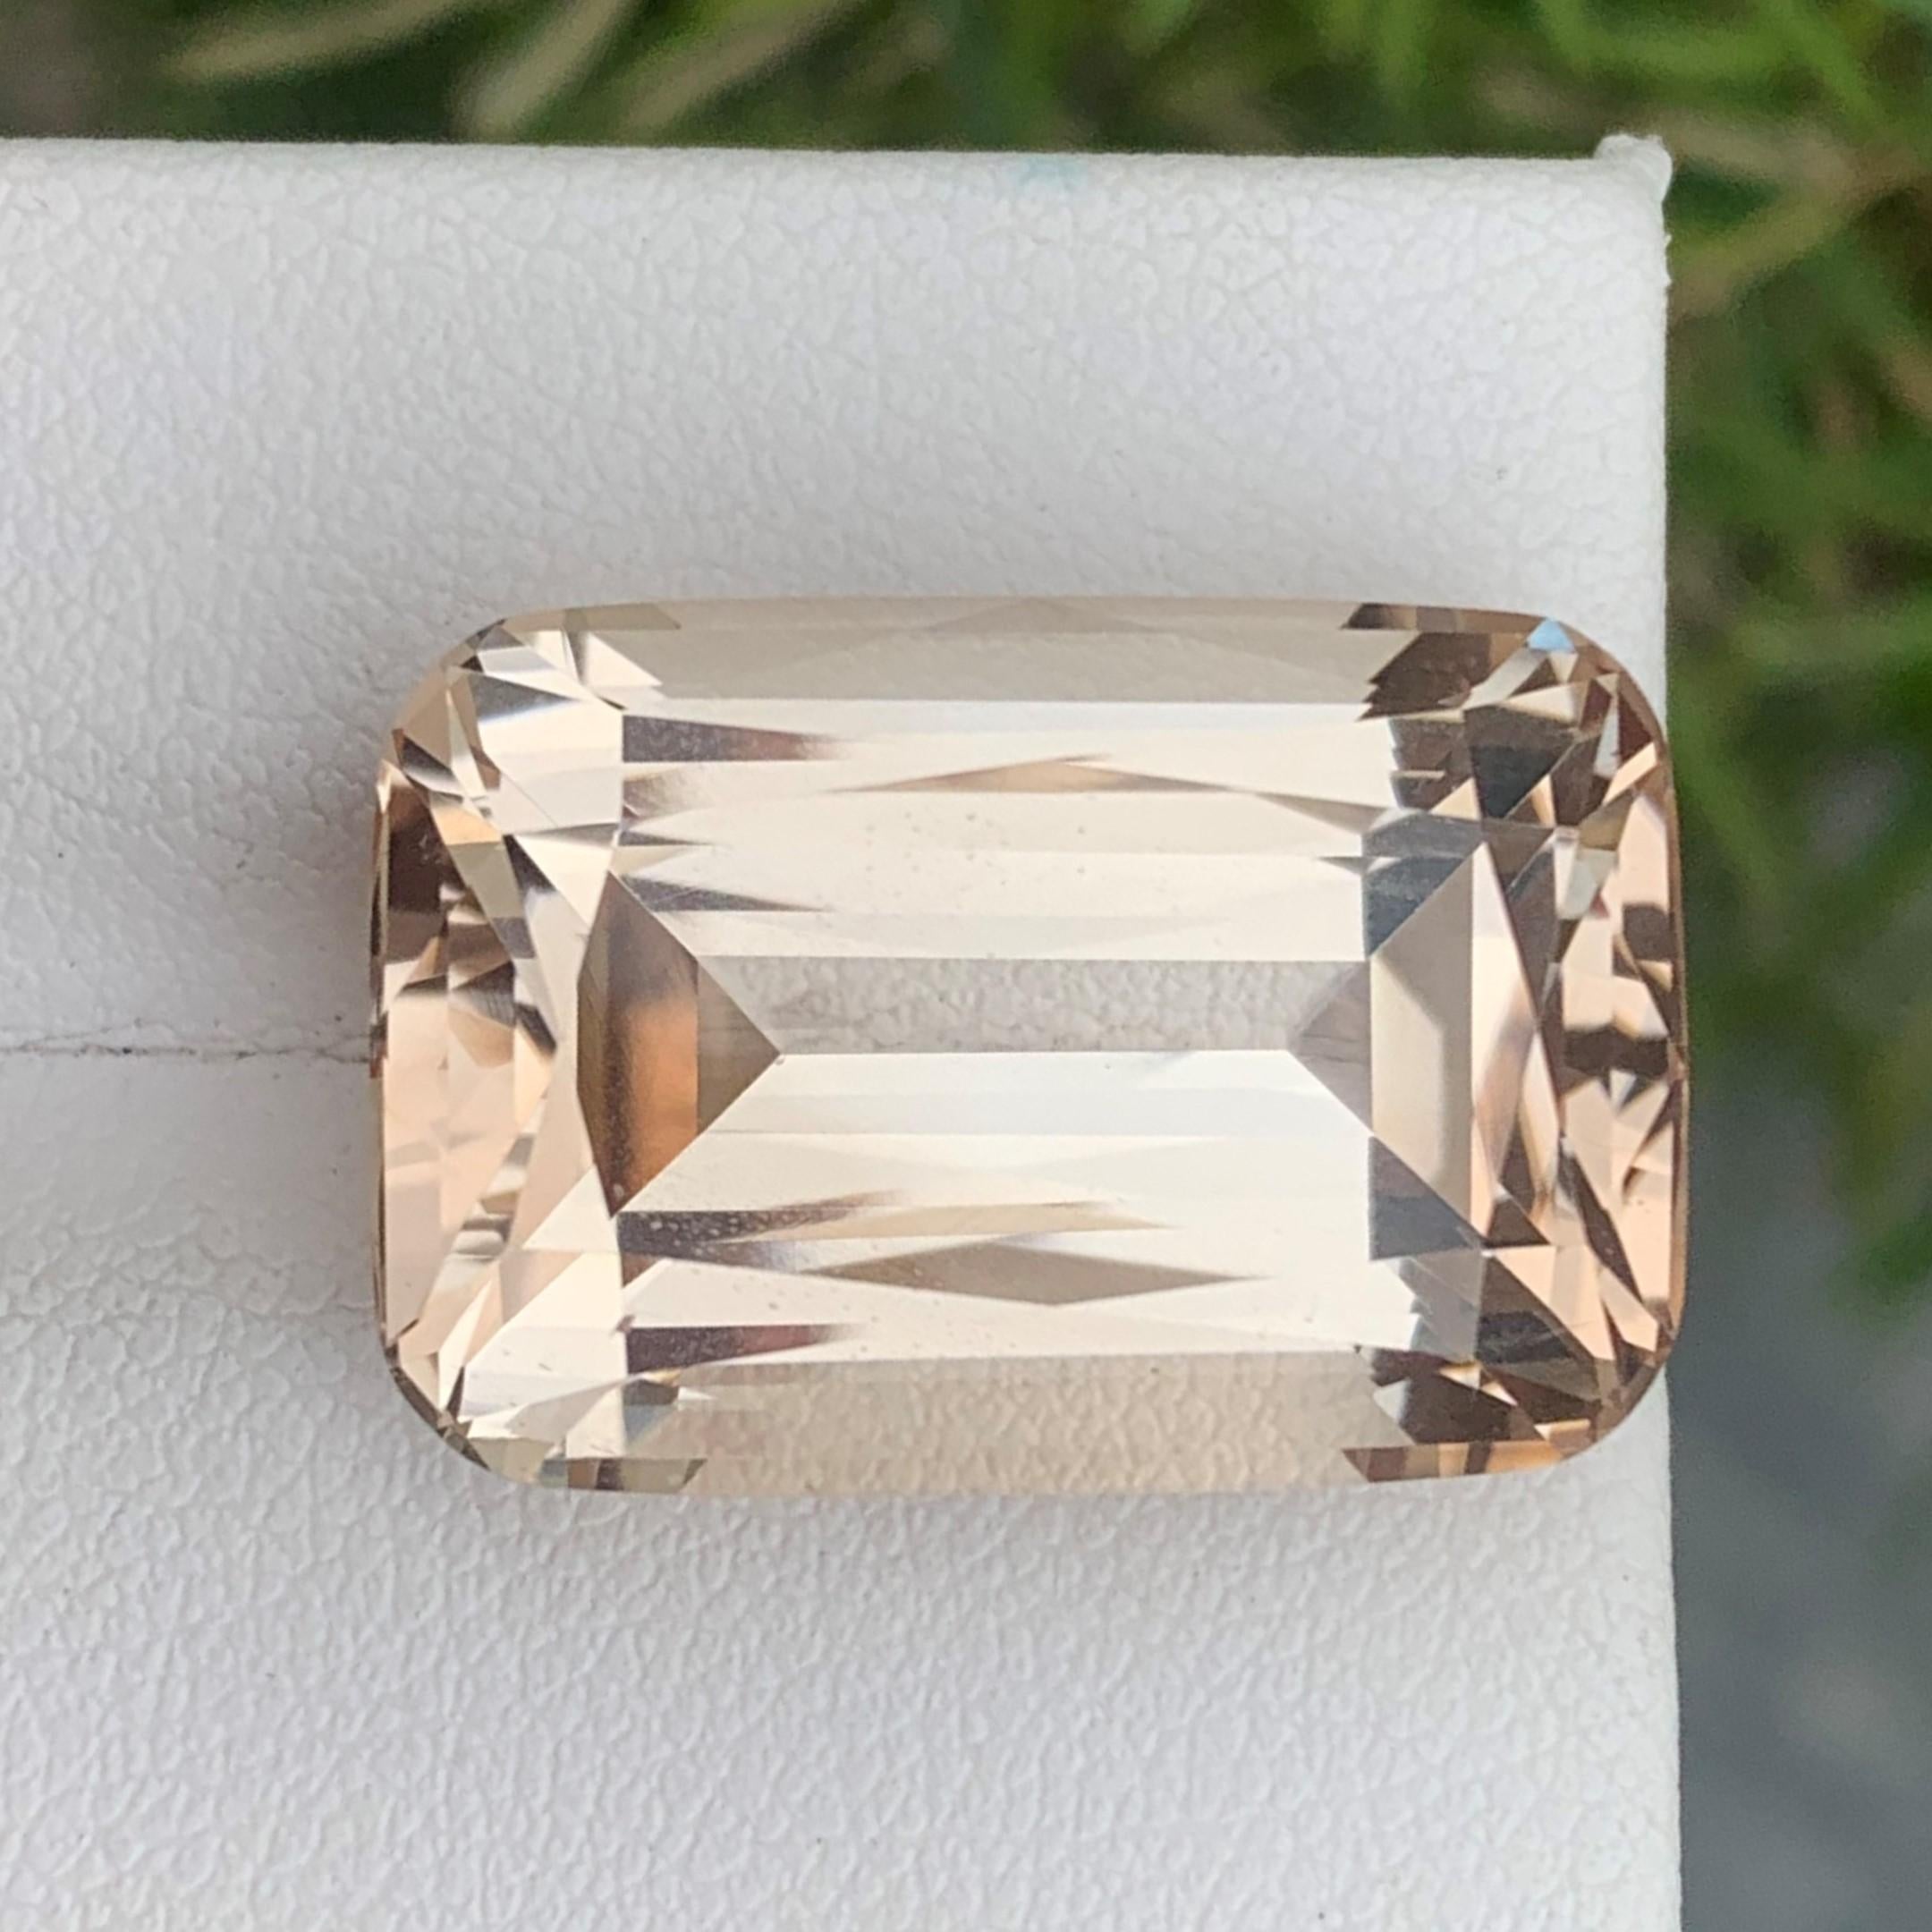 Gemstone Type : Topaz
Weight : 35.95 Carats
Dimensions : 24x15.3x11.1 mm
Clarity : Clean
Origin : Skardu
Color: Golden
Shape: Long Cushion
Cut: Cushion
Certificate: On Demand
Month: November
November Birthstone. Those with November birthdays have